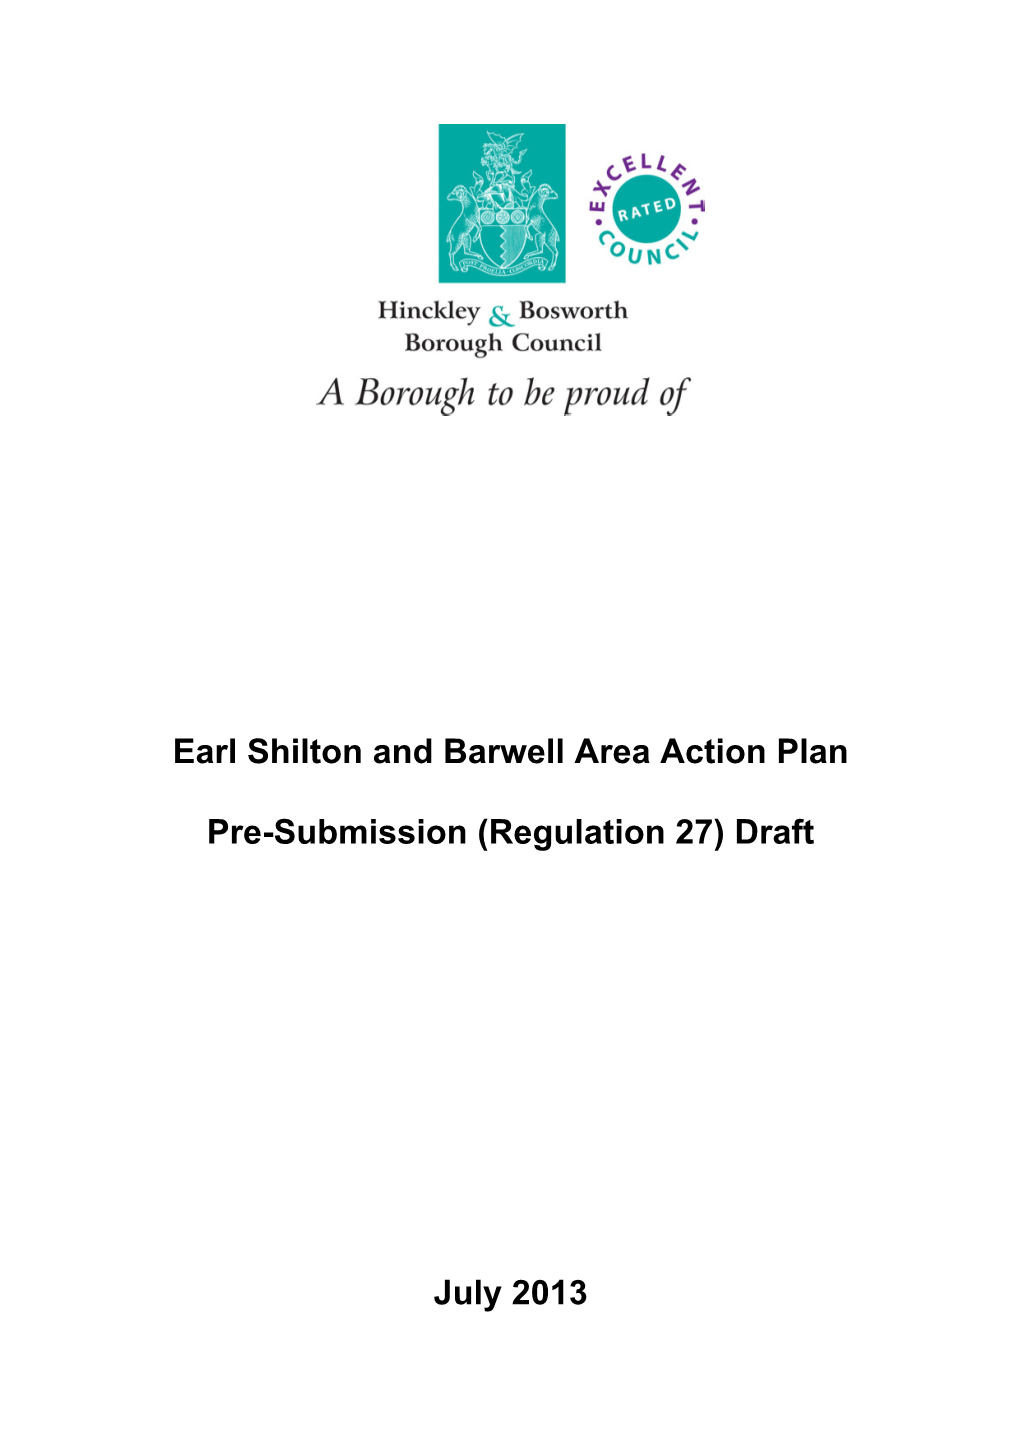 Earl Shilton and Barwell Area Action Plan Pre-Submission